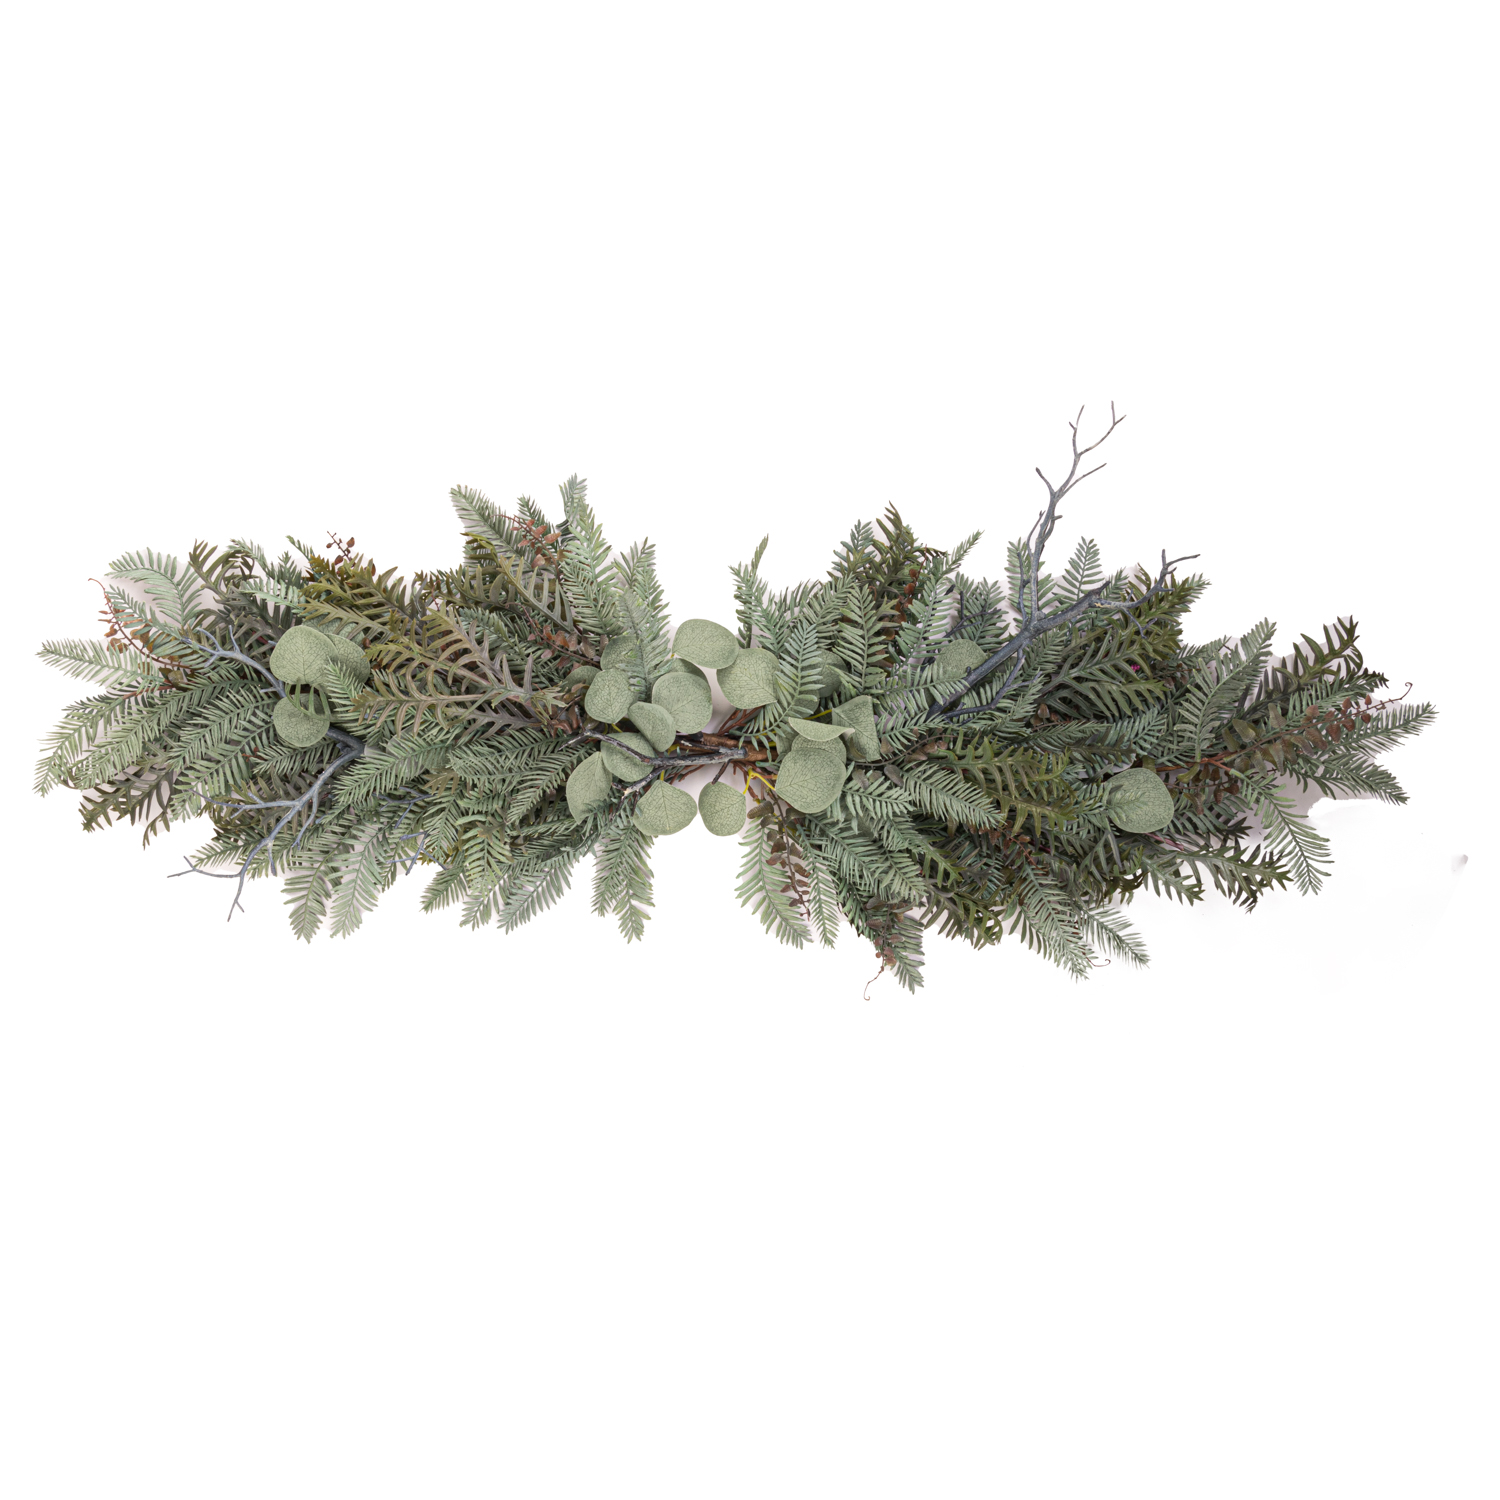 Winter Sash With Eucalyptus And Fern - Image 1